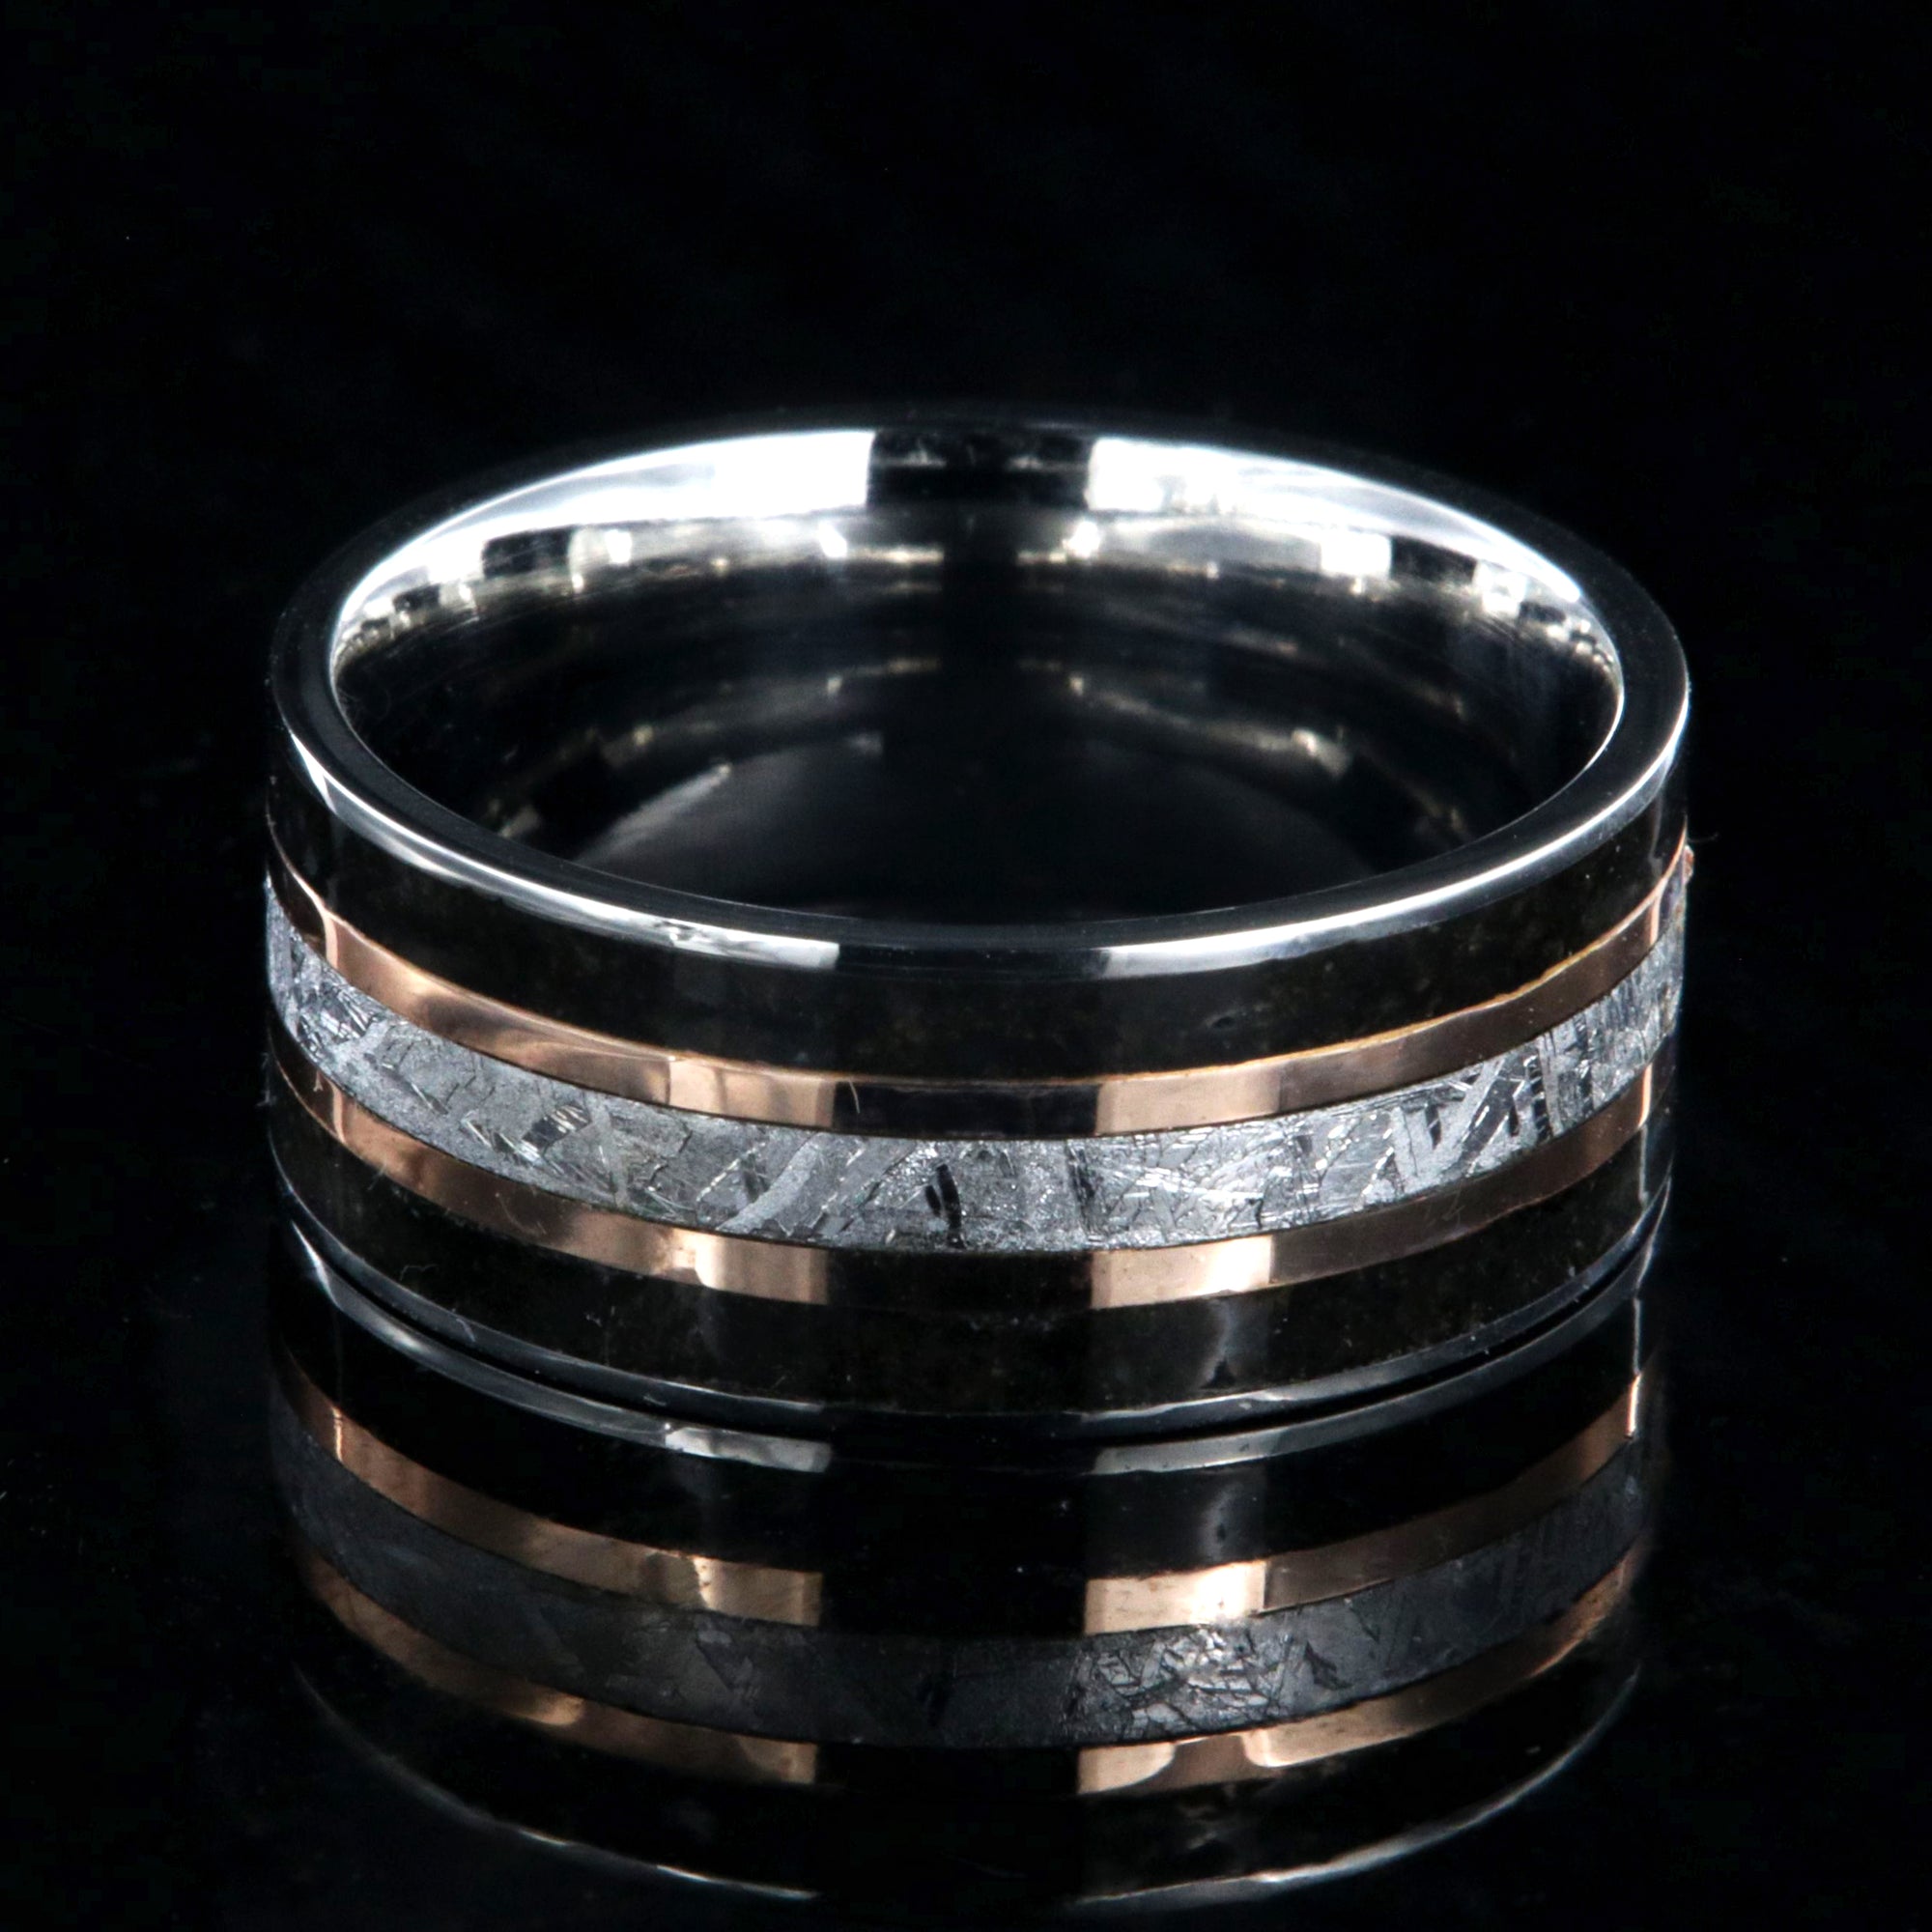 9mm wide ring with meteorite center, dual rose gold inlays, and dinosaur bone edges